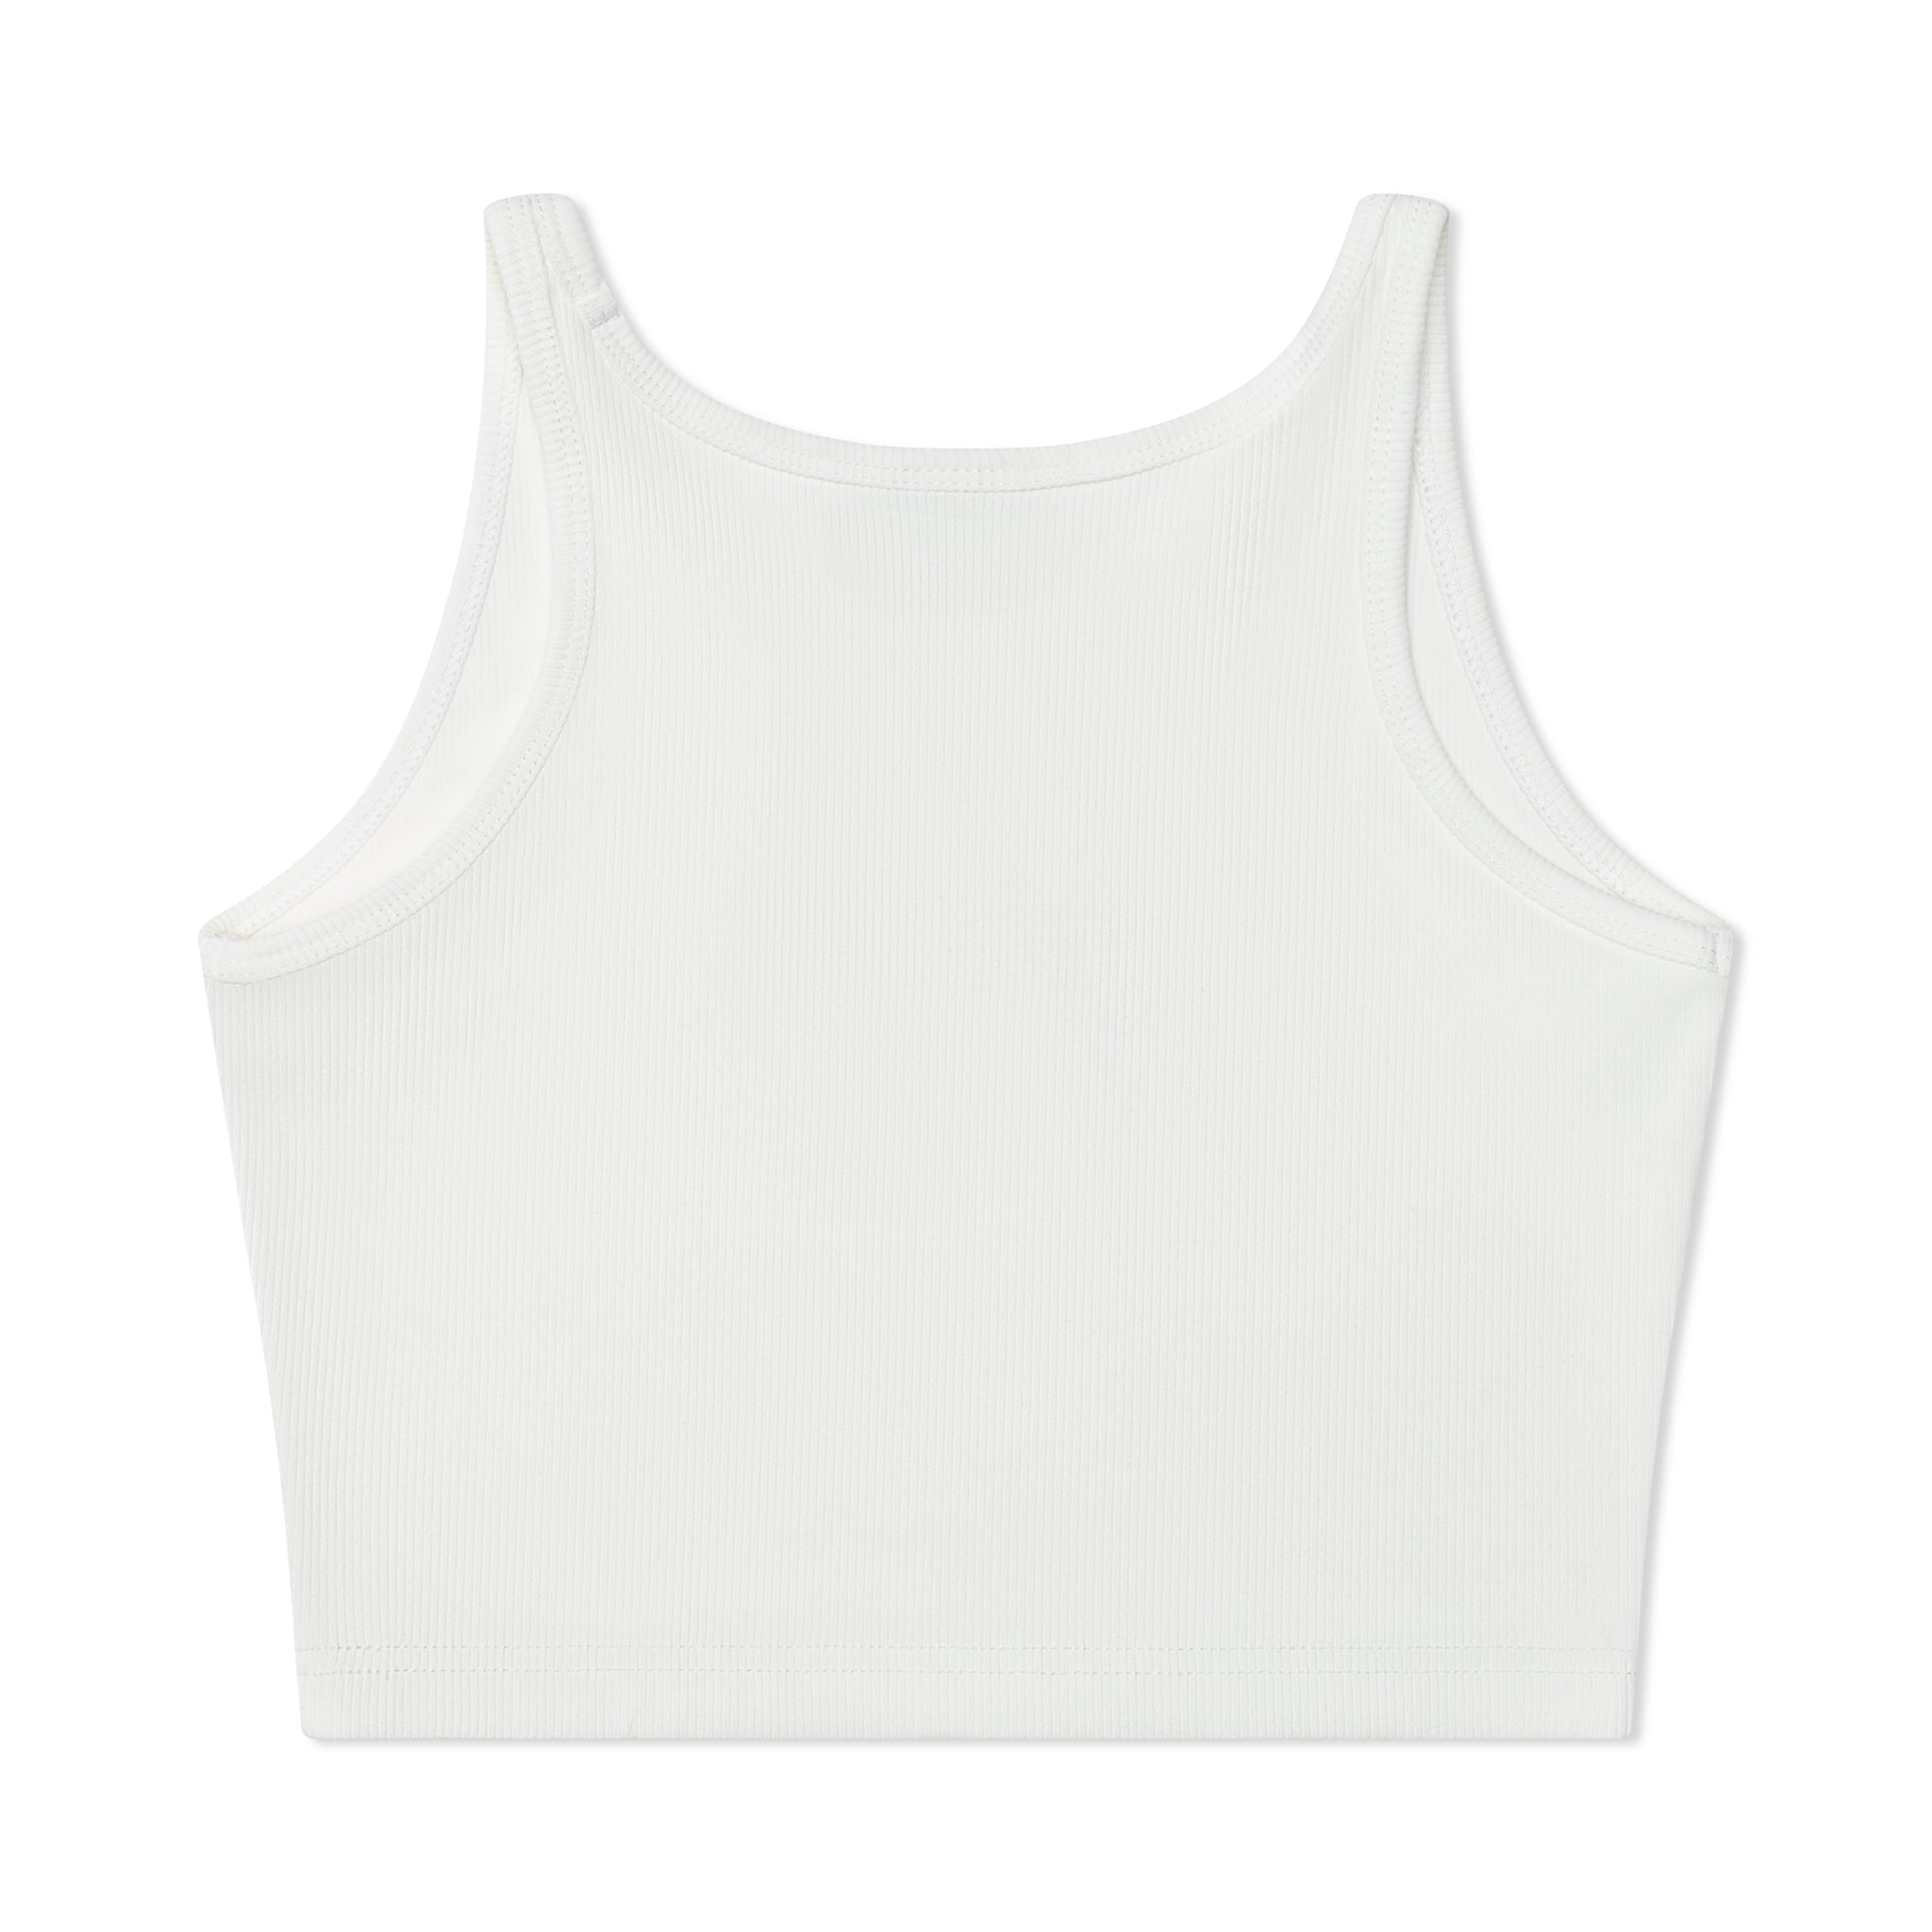 Hebe White Backless Crop Tank Top